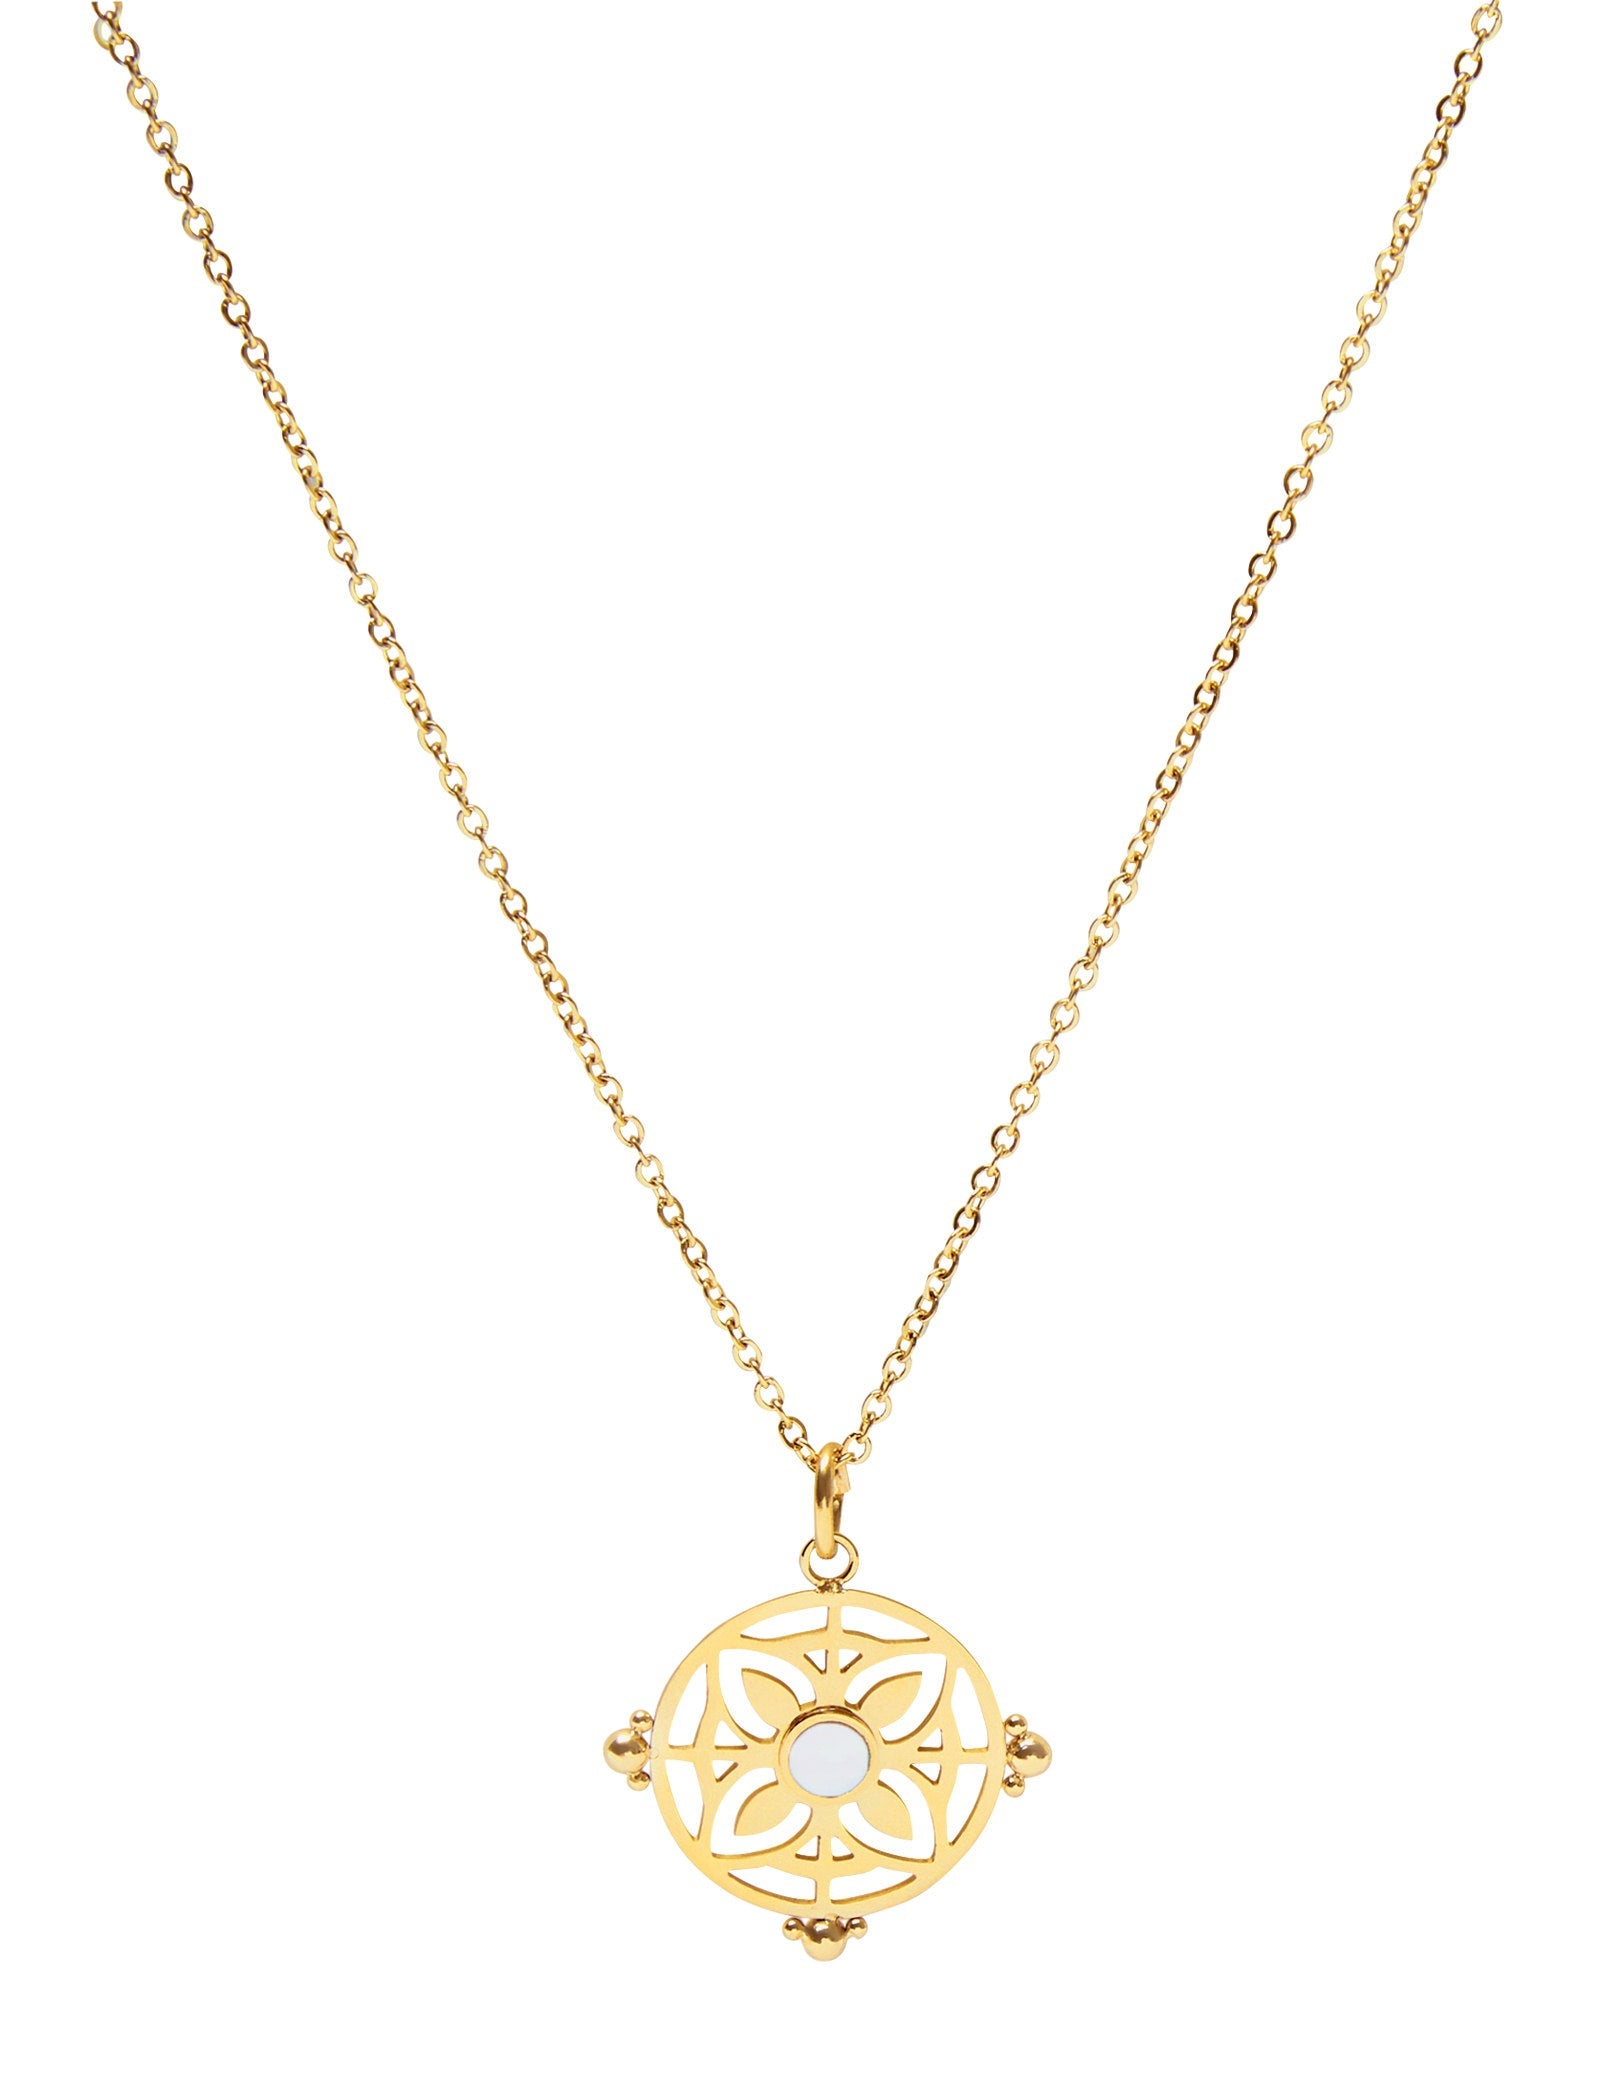 Sila Necklace - Bohemian Inspired Gold Plated Design | Pastiche